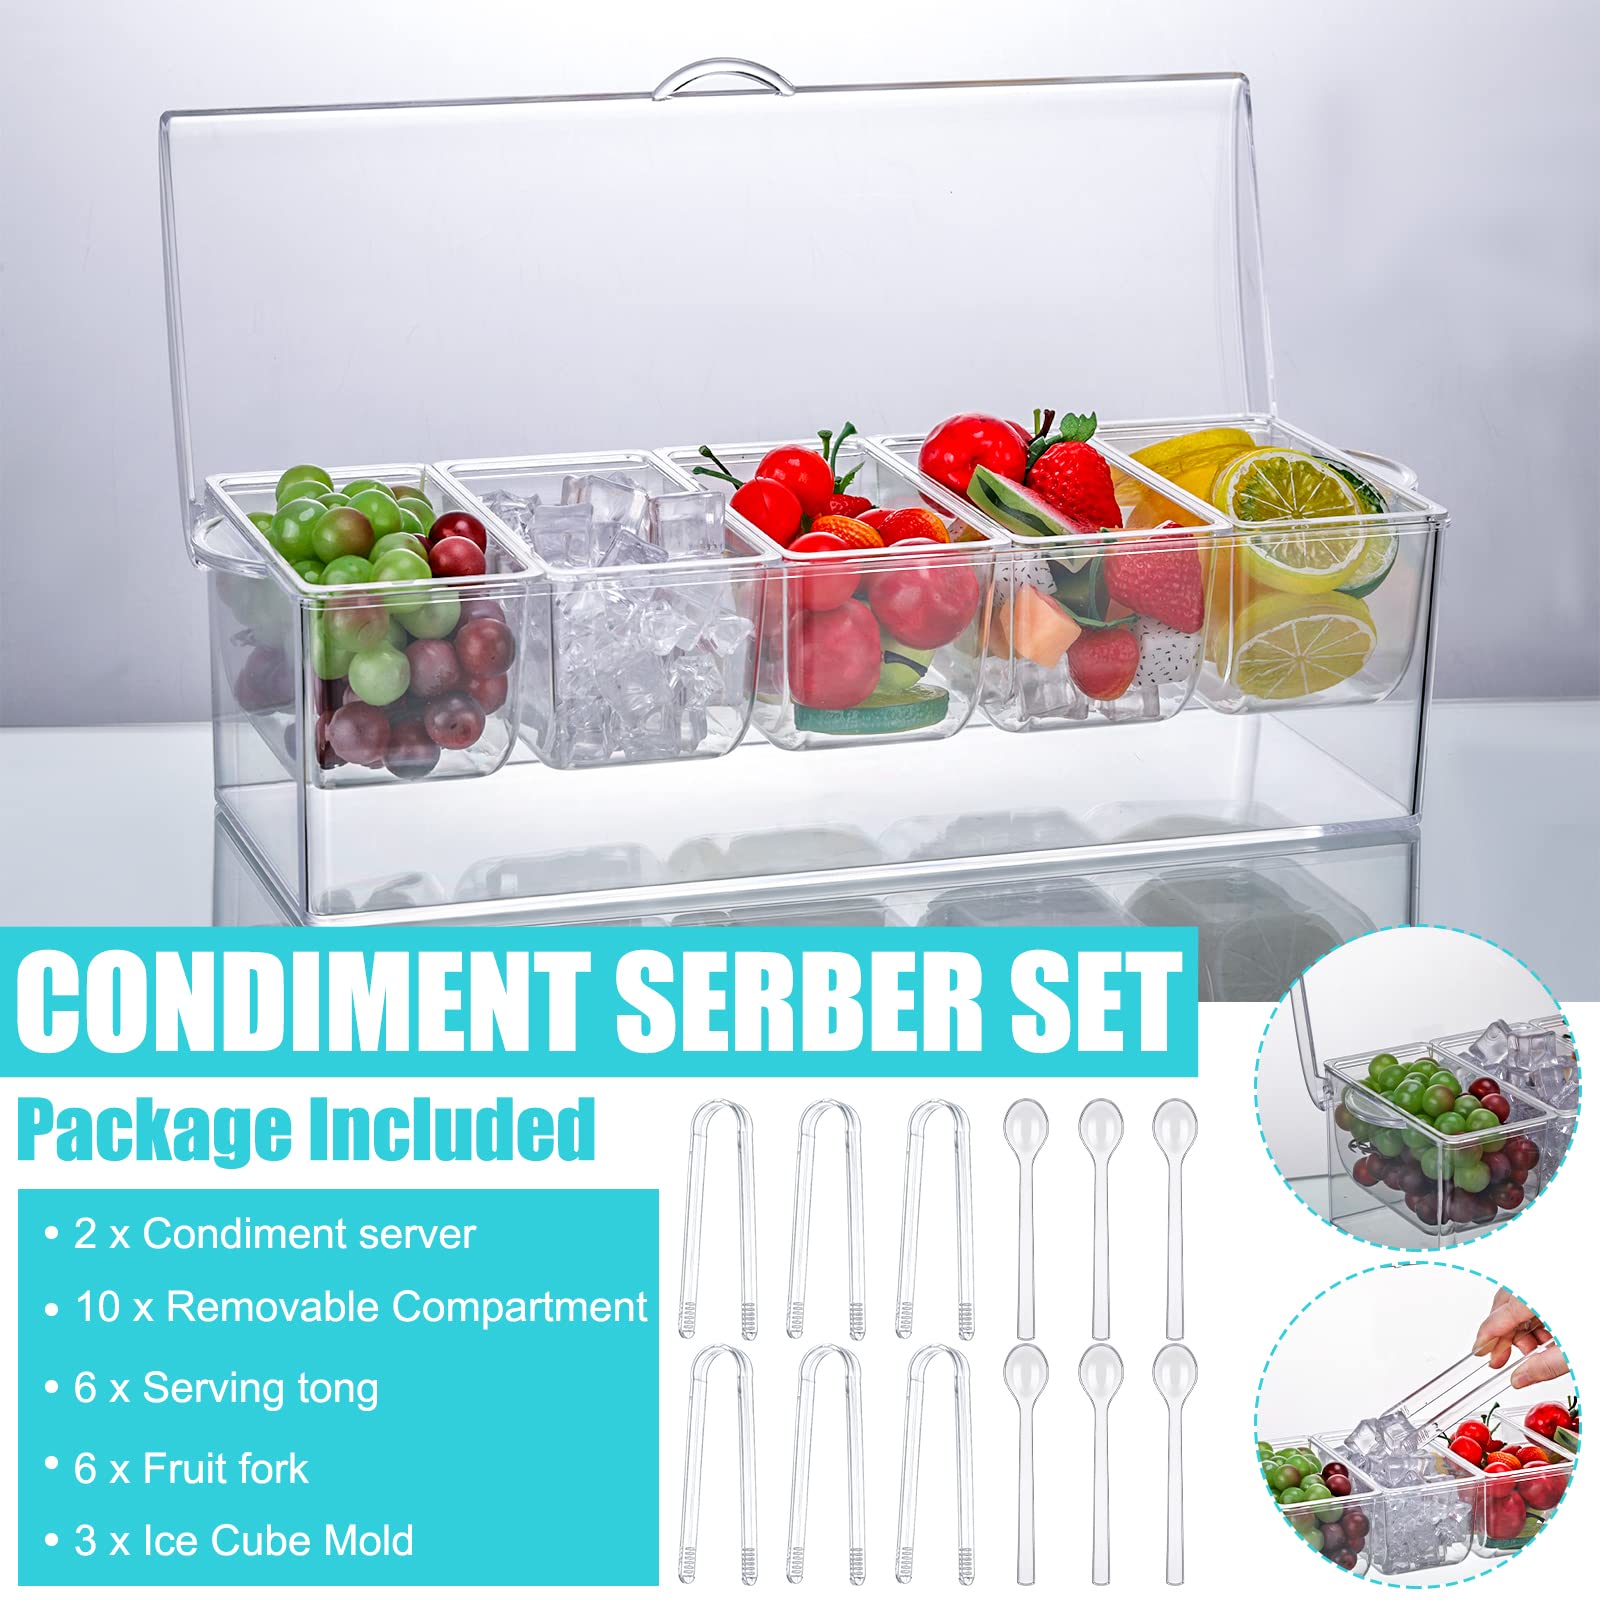 17 Pcs Condiment Server with Lid Chilled Condiment Tray with 5 Compartments Container Set Include 2 Garnish Tray, 3 Cocktail Ice Cube Tray, 6 Spoon 6 Tong, Bar Fruit Caddy with Lid Condiment Organizer